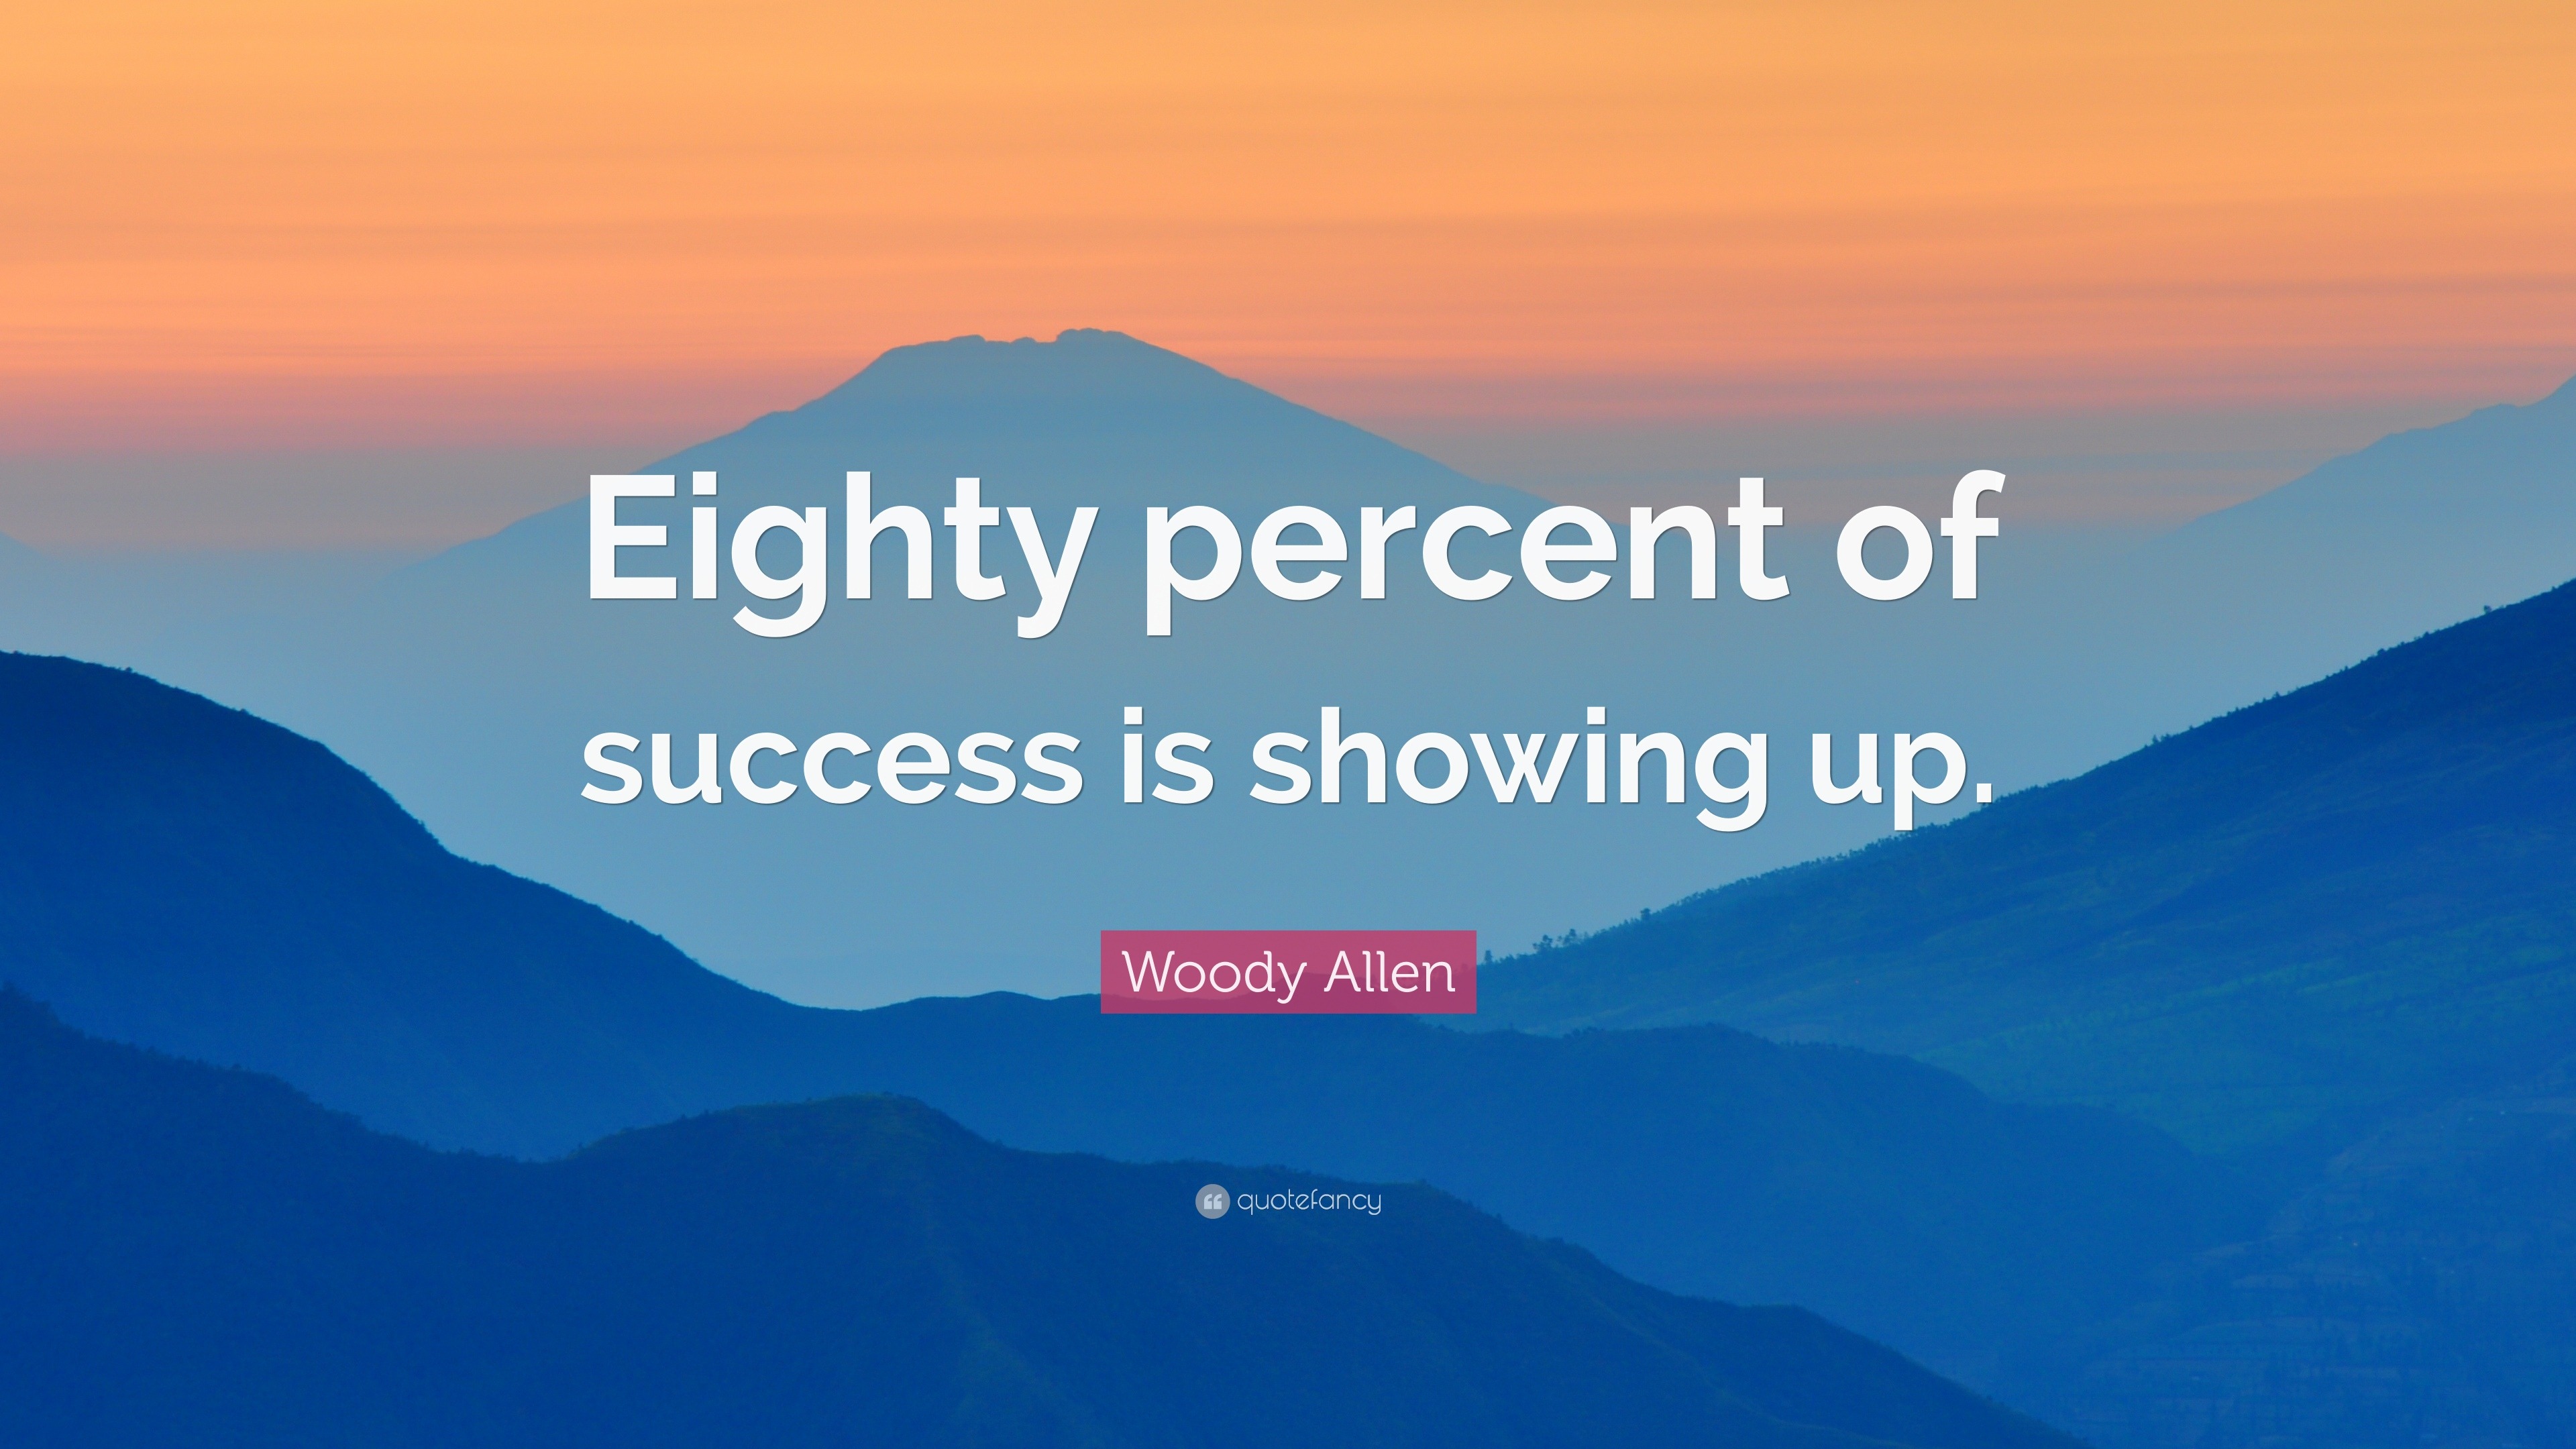 Woody Allen Quote “eighty Percent Of Success Is Showing Up” 23 Wallpapers Quotefancy 2237